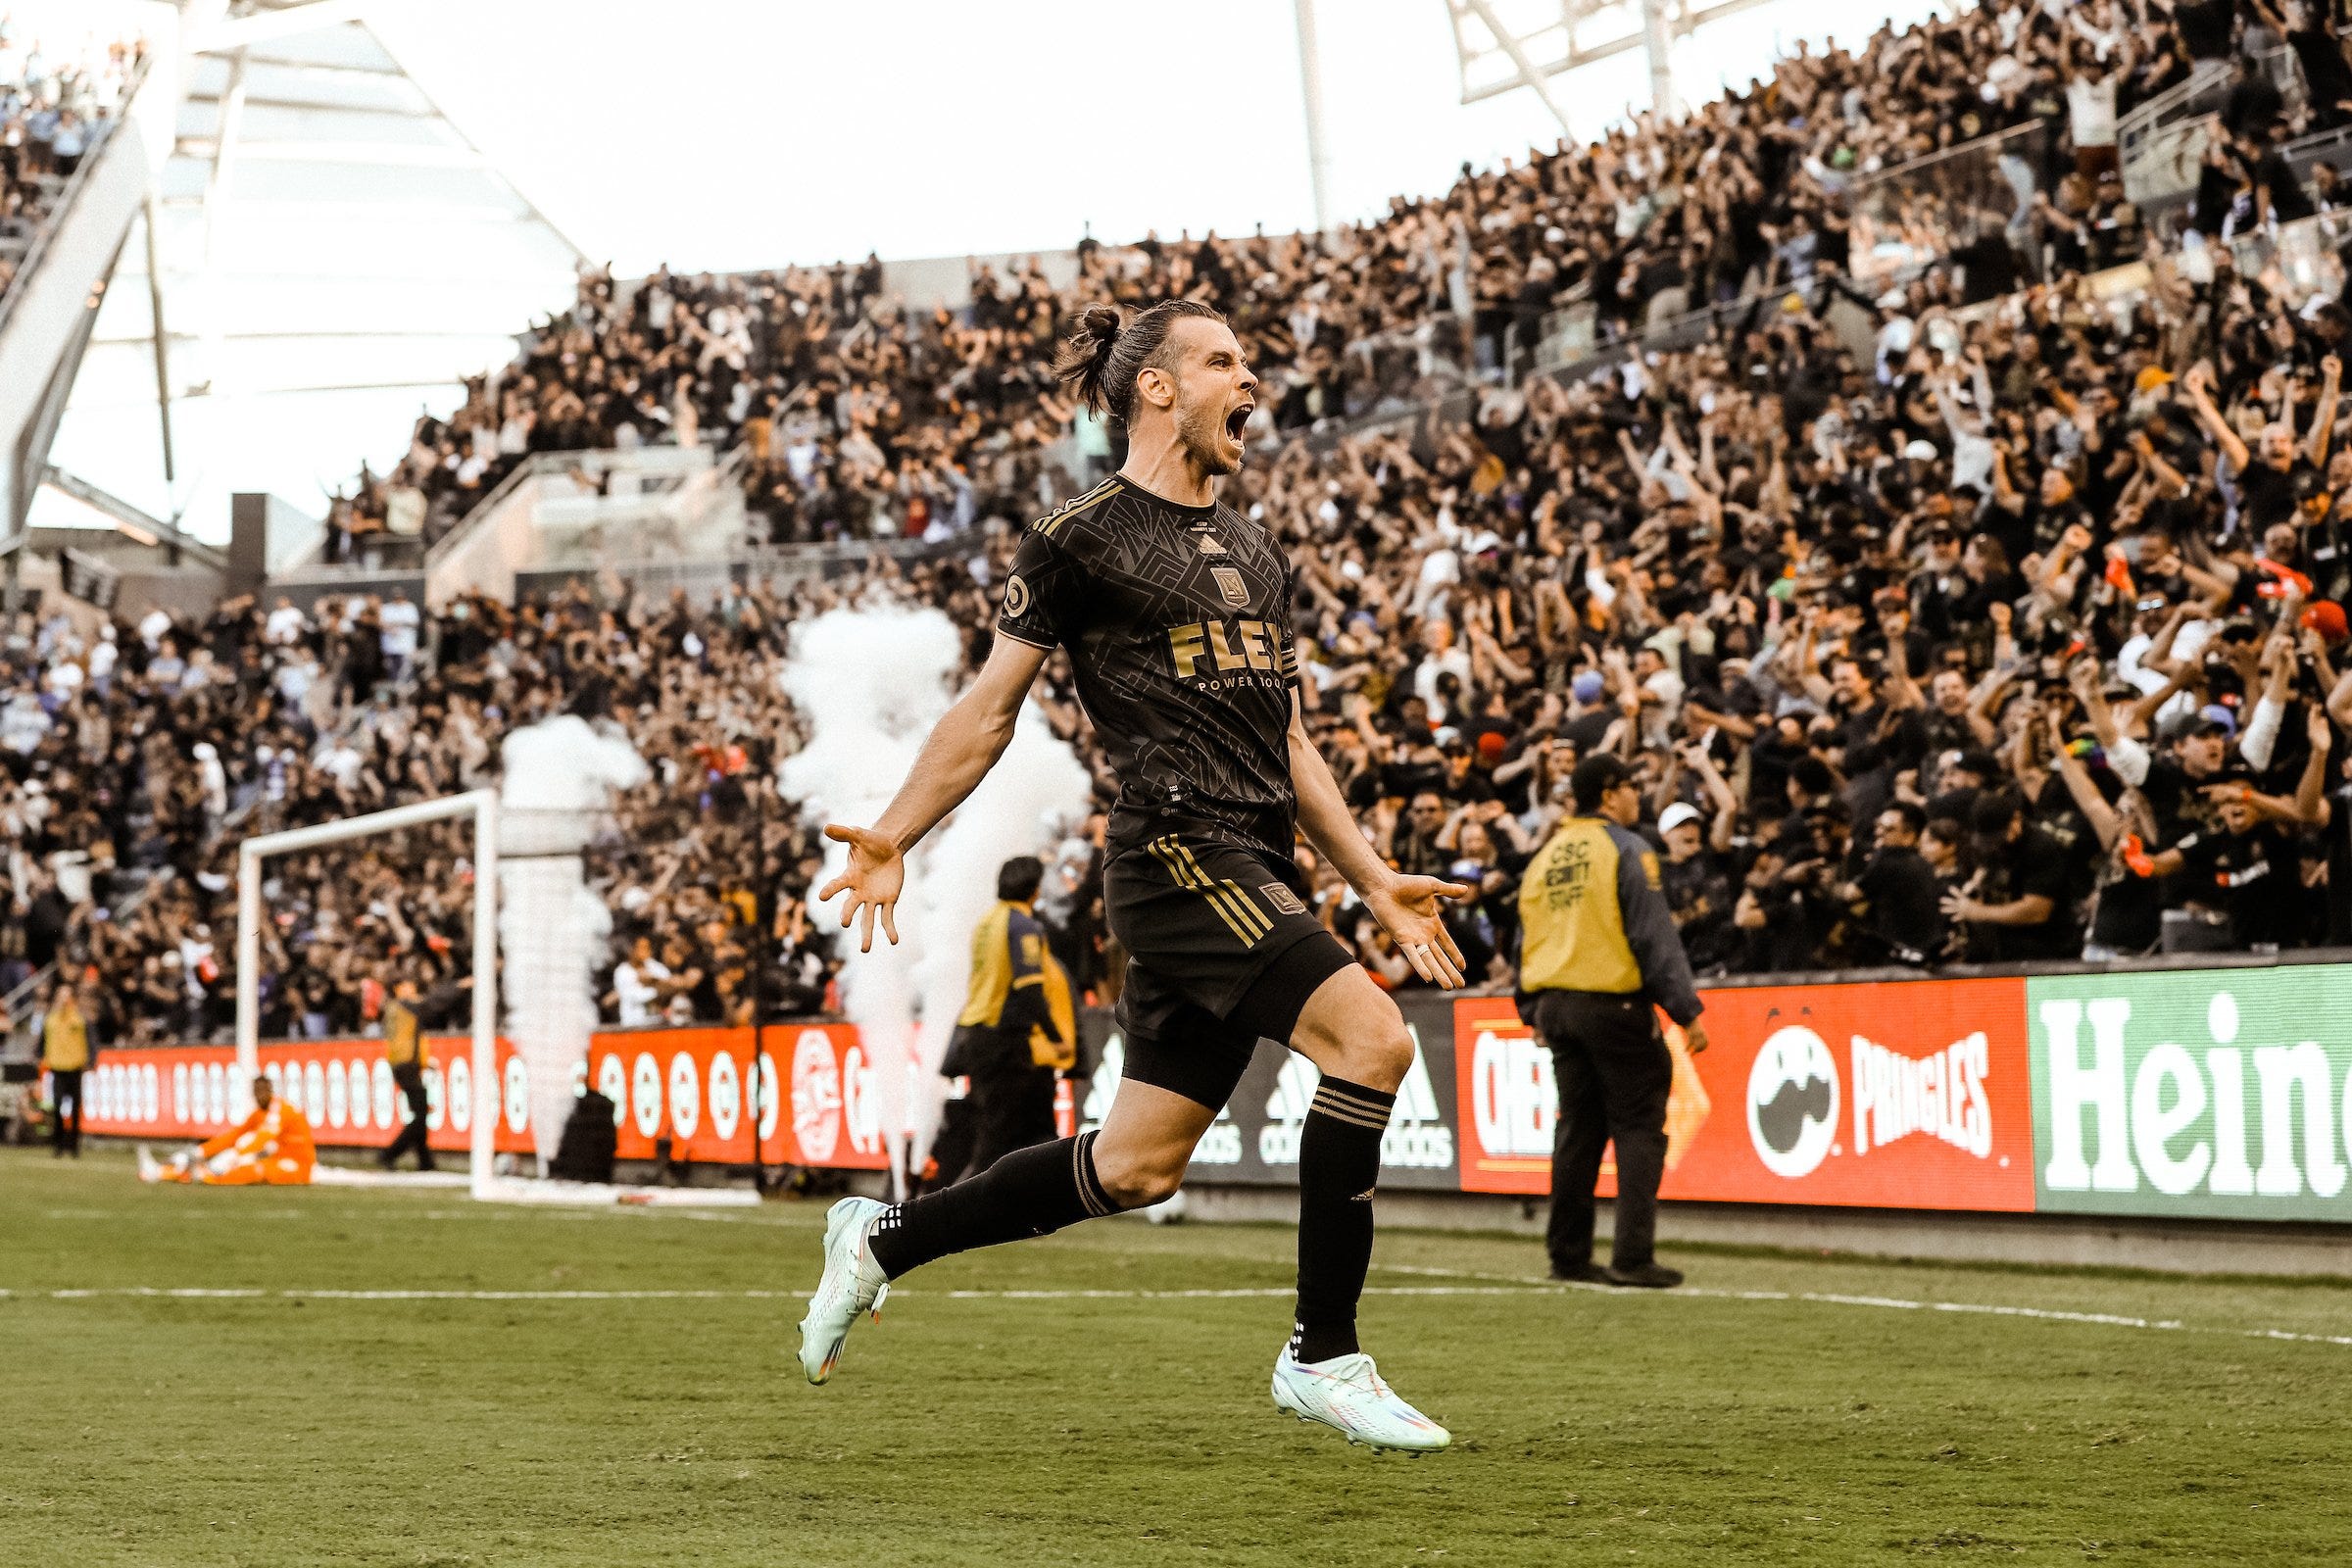 In A Heart-Stopping Match, LAFC Wins Its First-Ever Major League